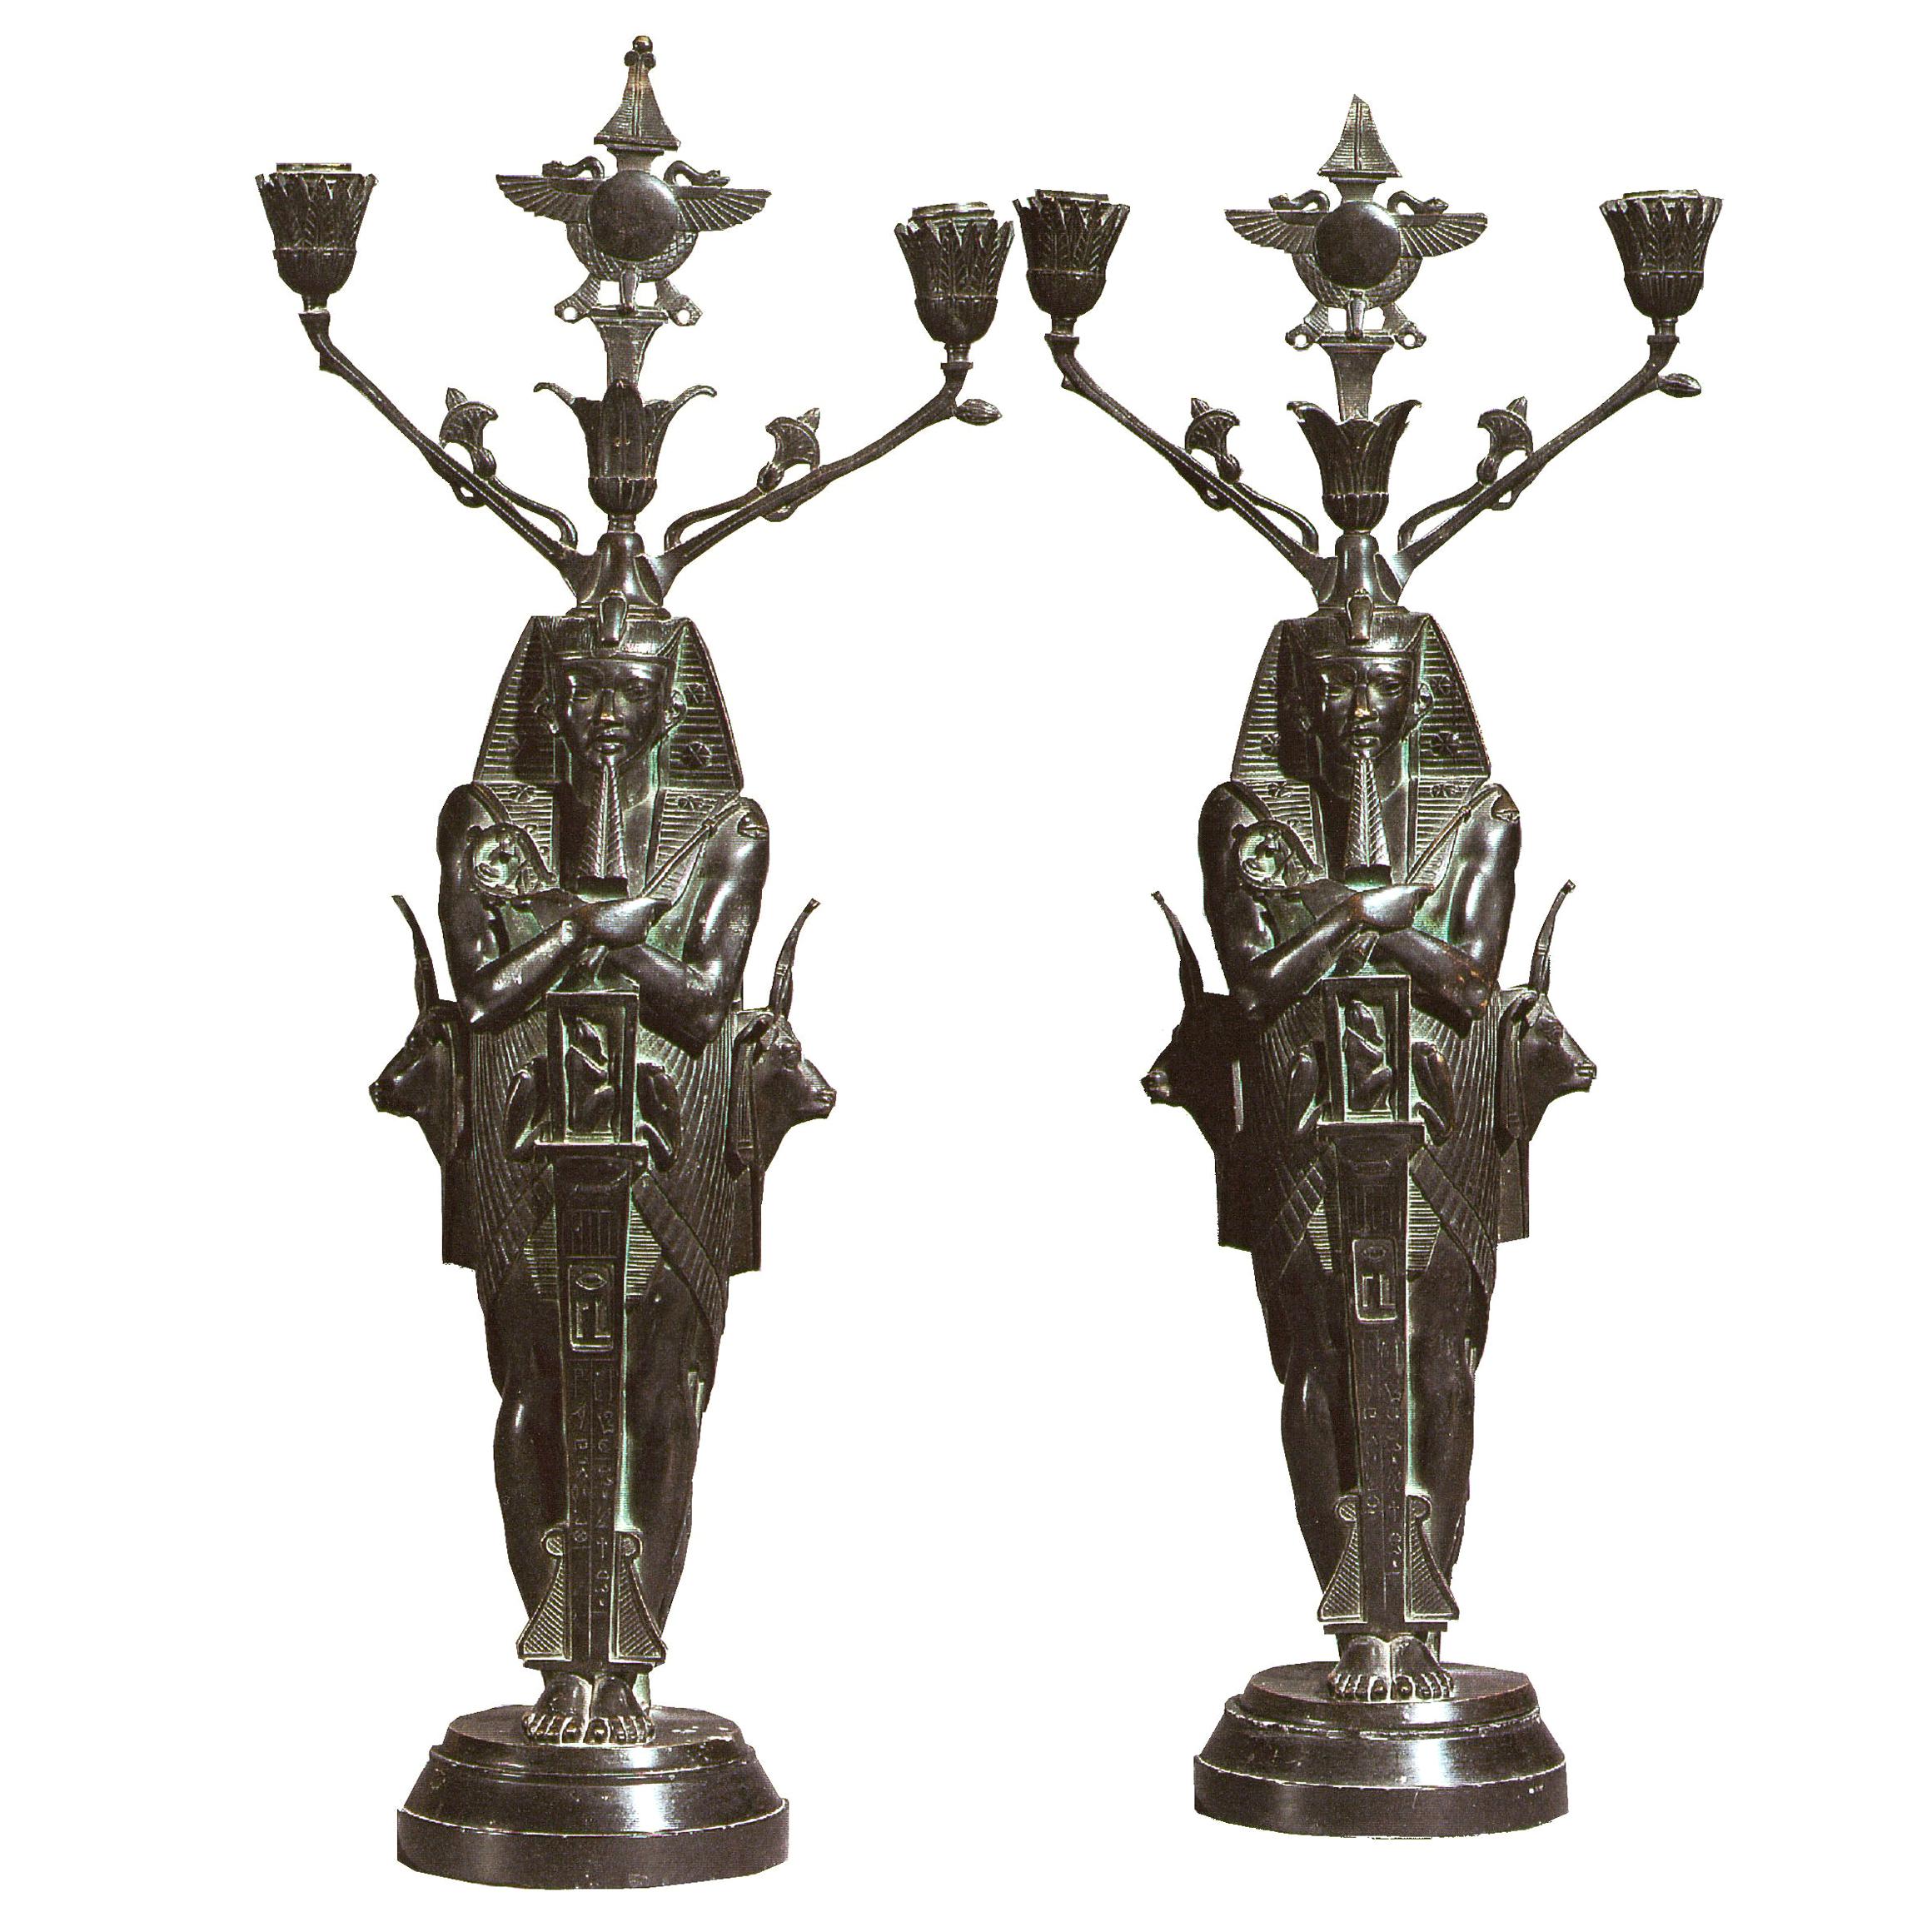 Unusual Pair of Egyptian Revival Candelabra, 19th Century For Sale